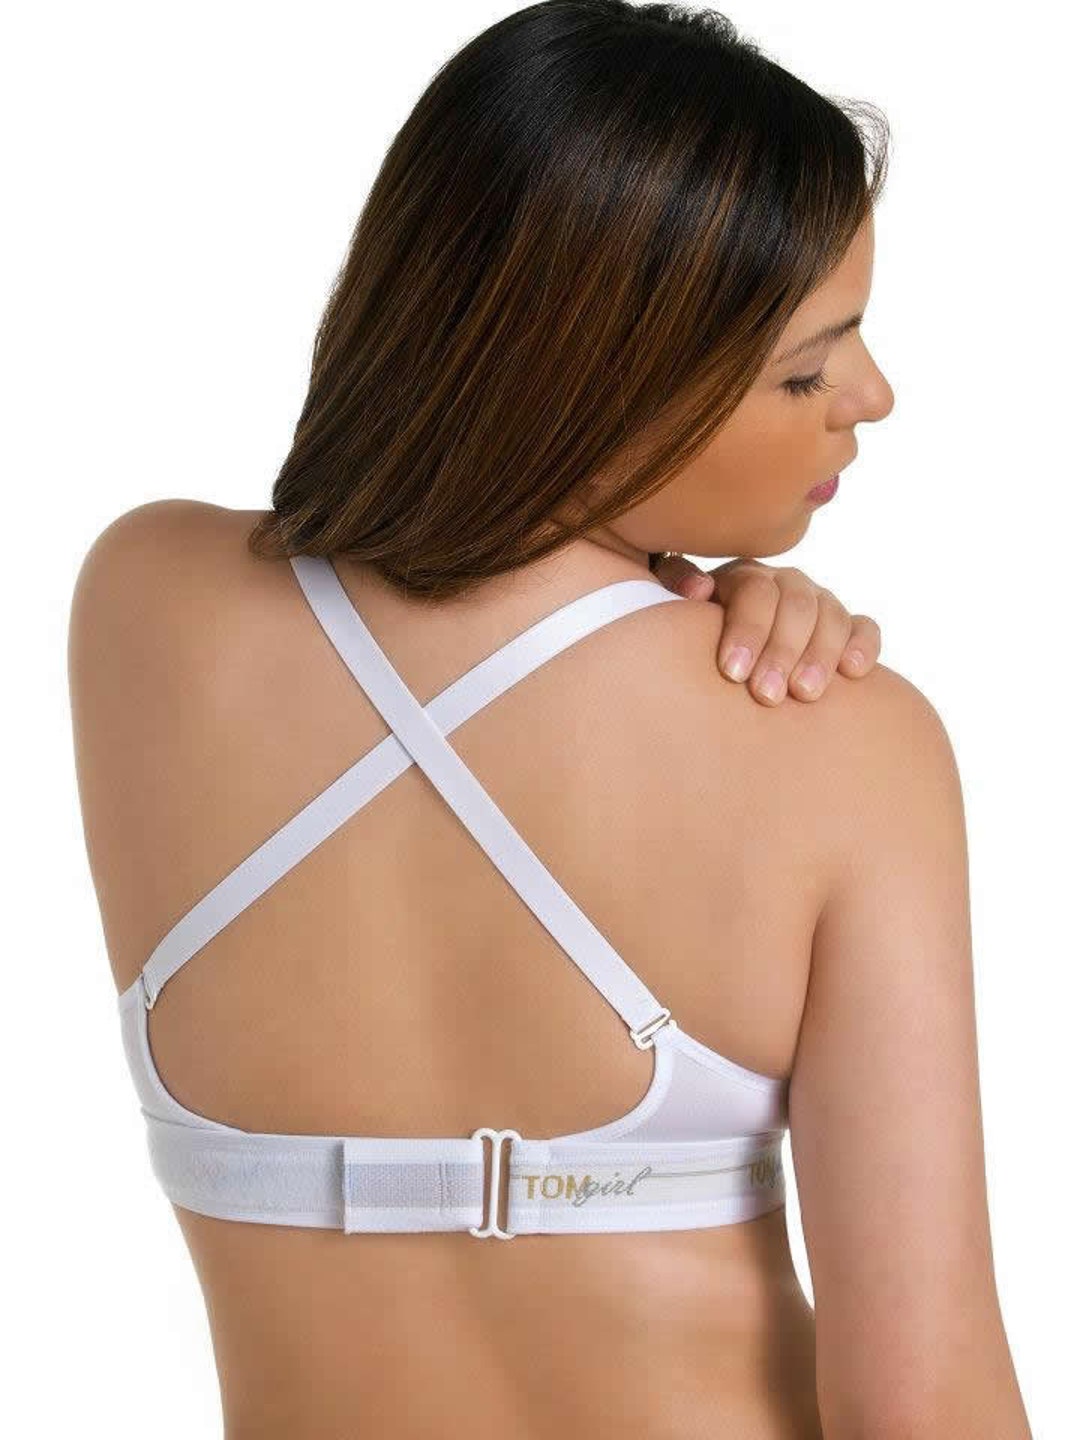 28D White Bralette With Hook and Loop Closure, Yoga Bra, Adjustable  Bralette Provides Comfort and Support, Convertible Bralette,crossback 